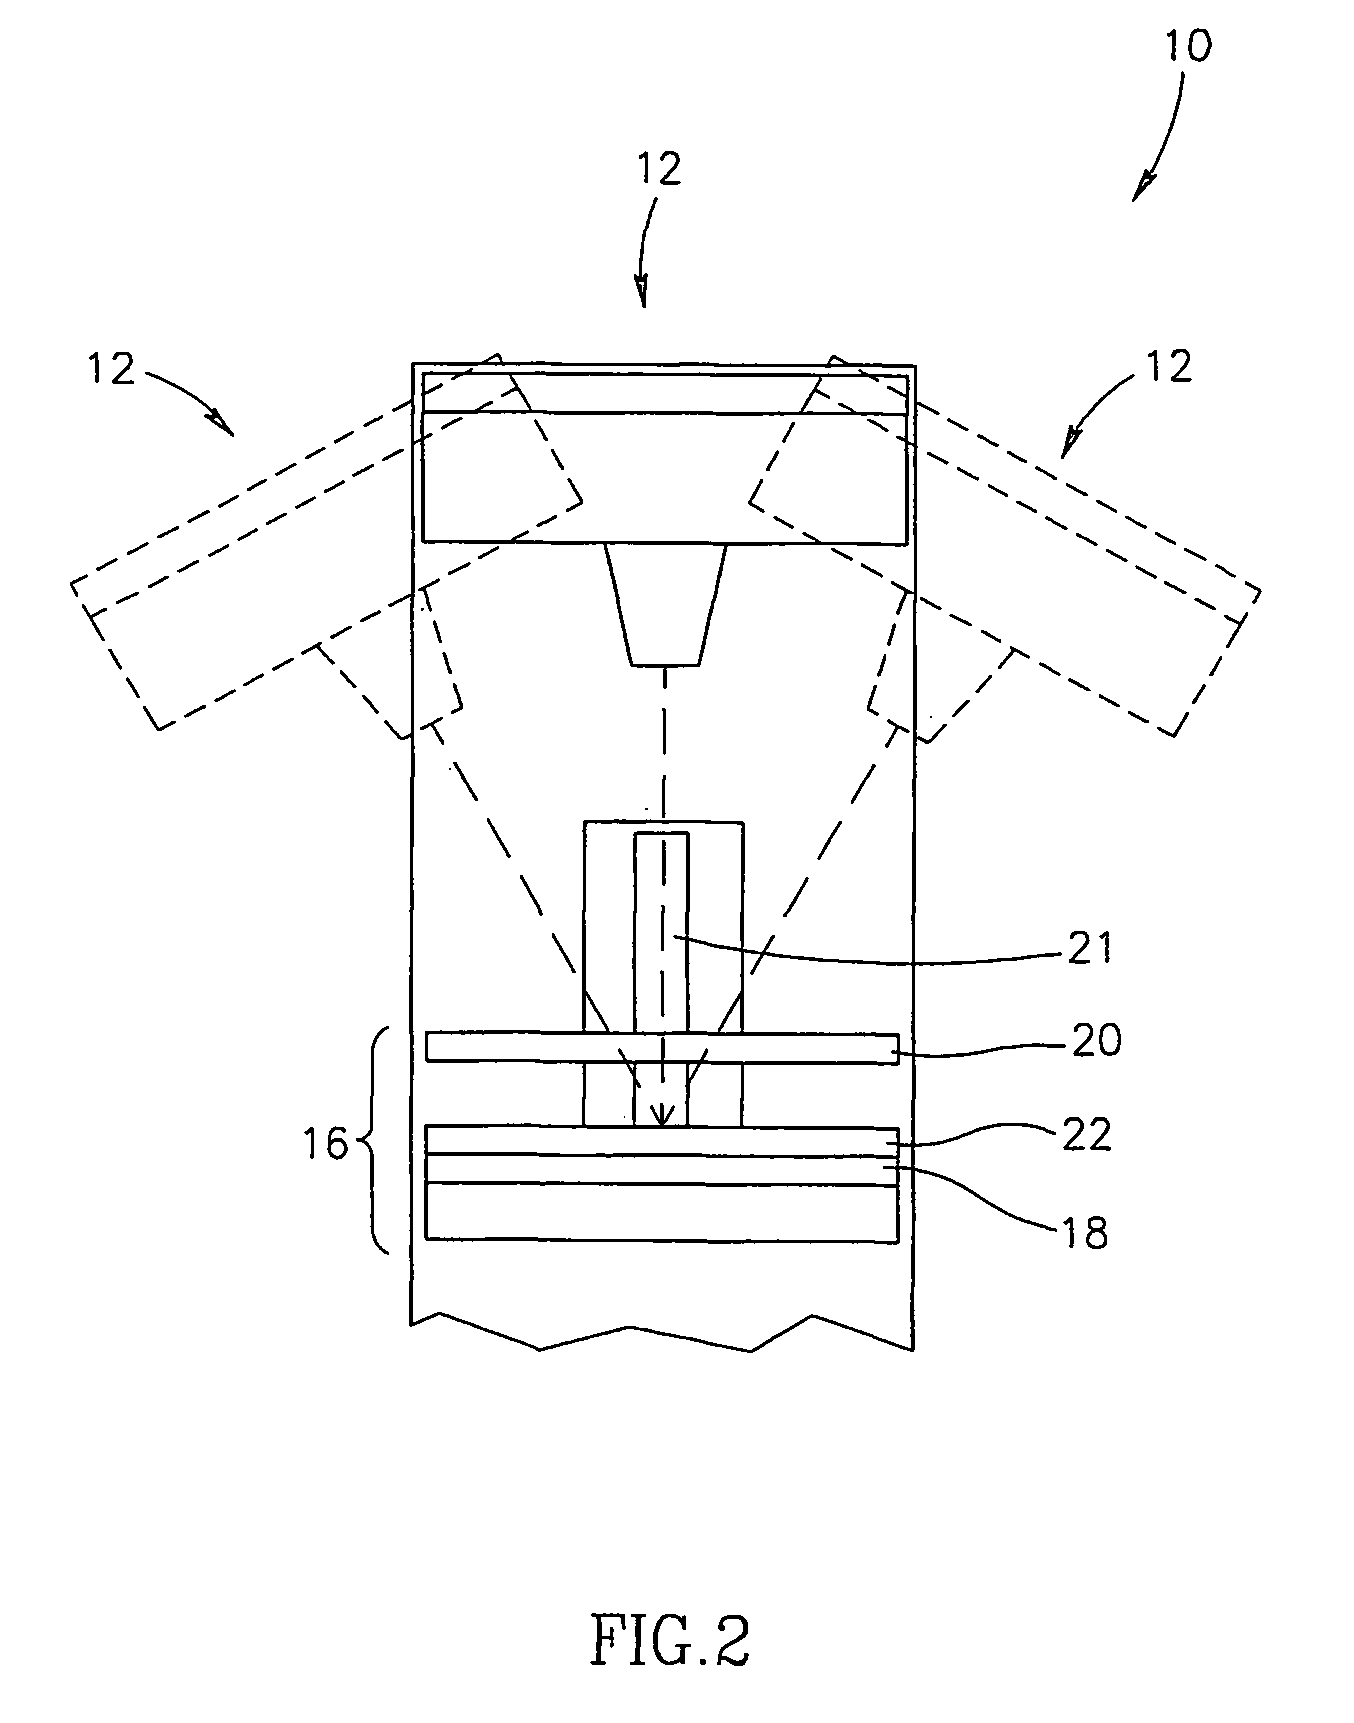 Apparatus for impedance imaging coupled with another modality